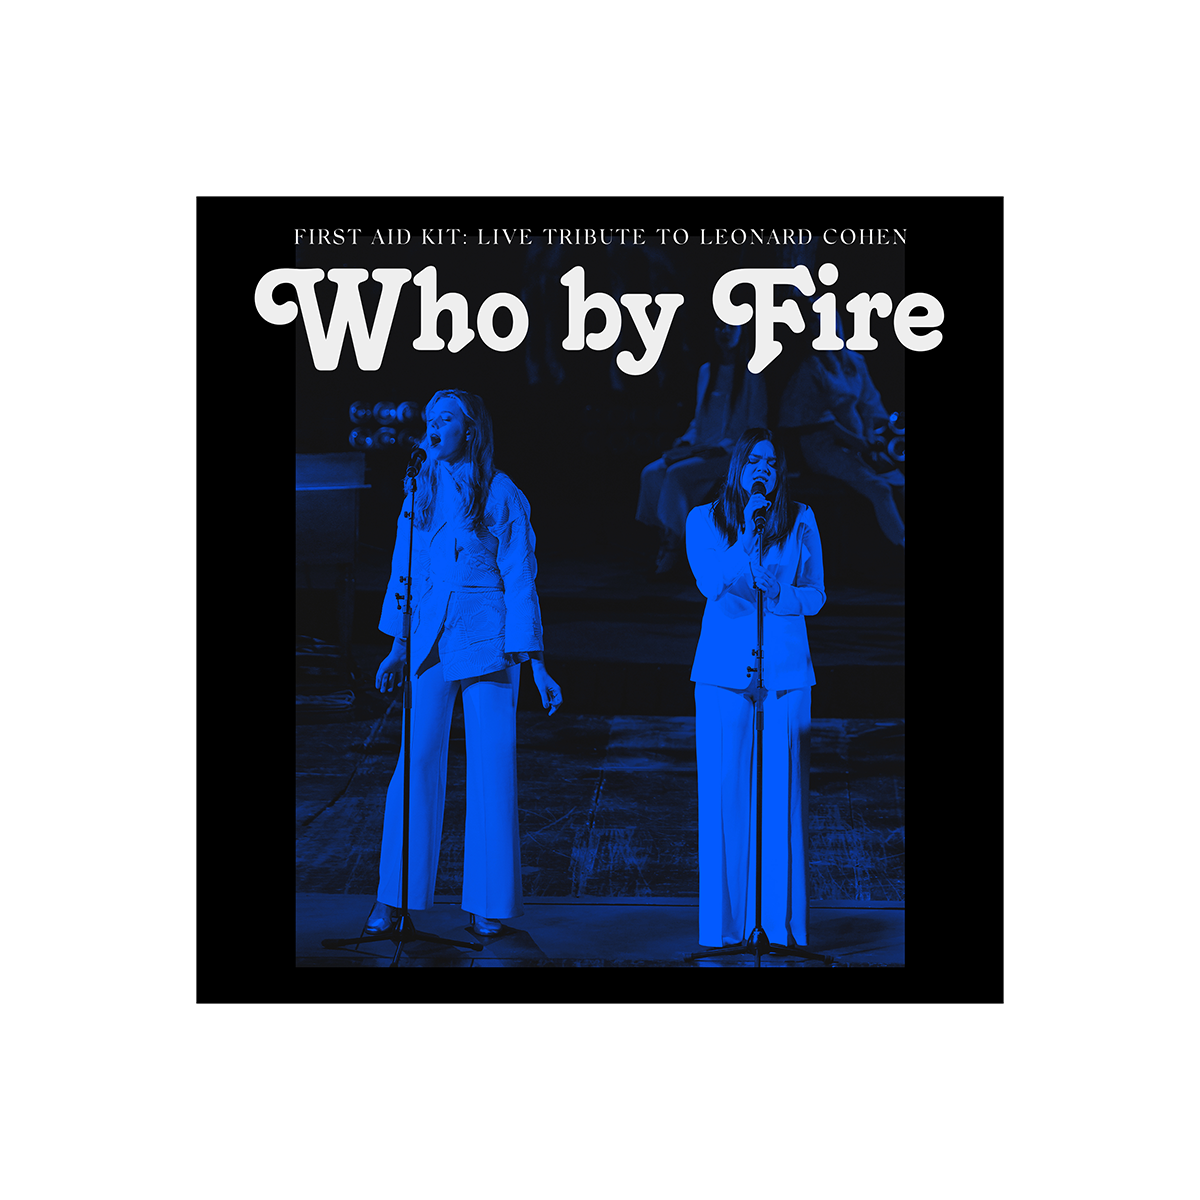 First Aid Kit - Who By Fire (Live Tribute To Leonard Cohen): CD